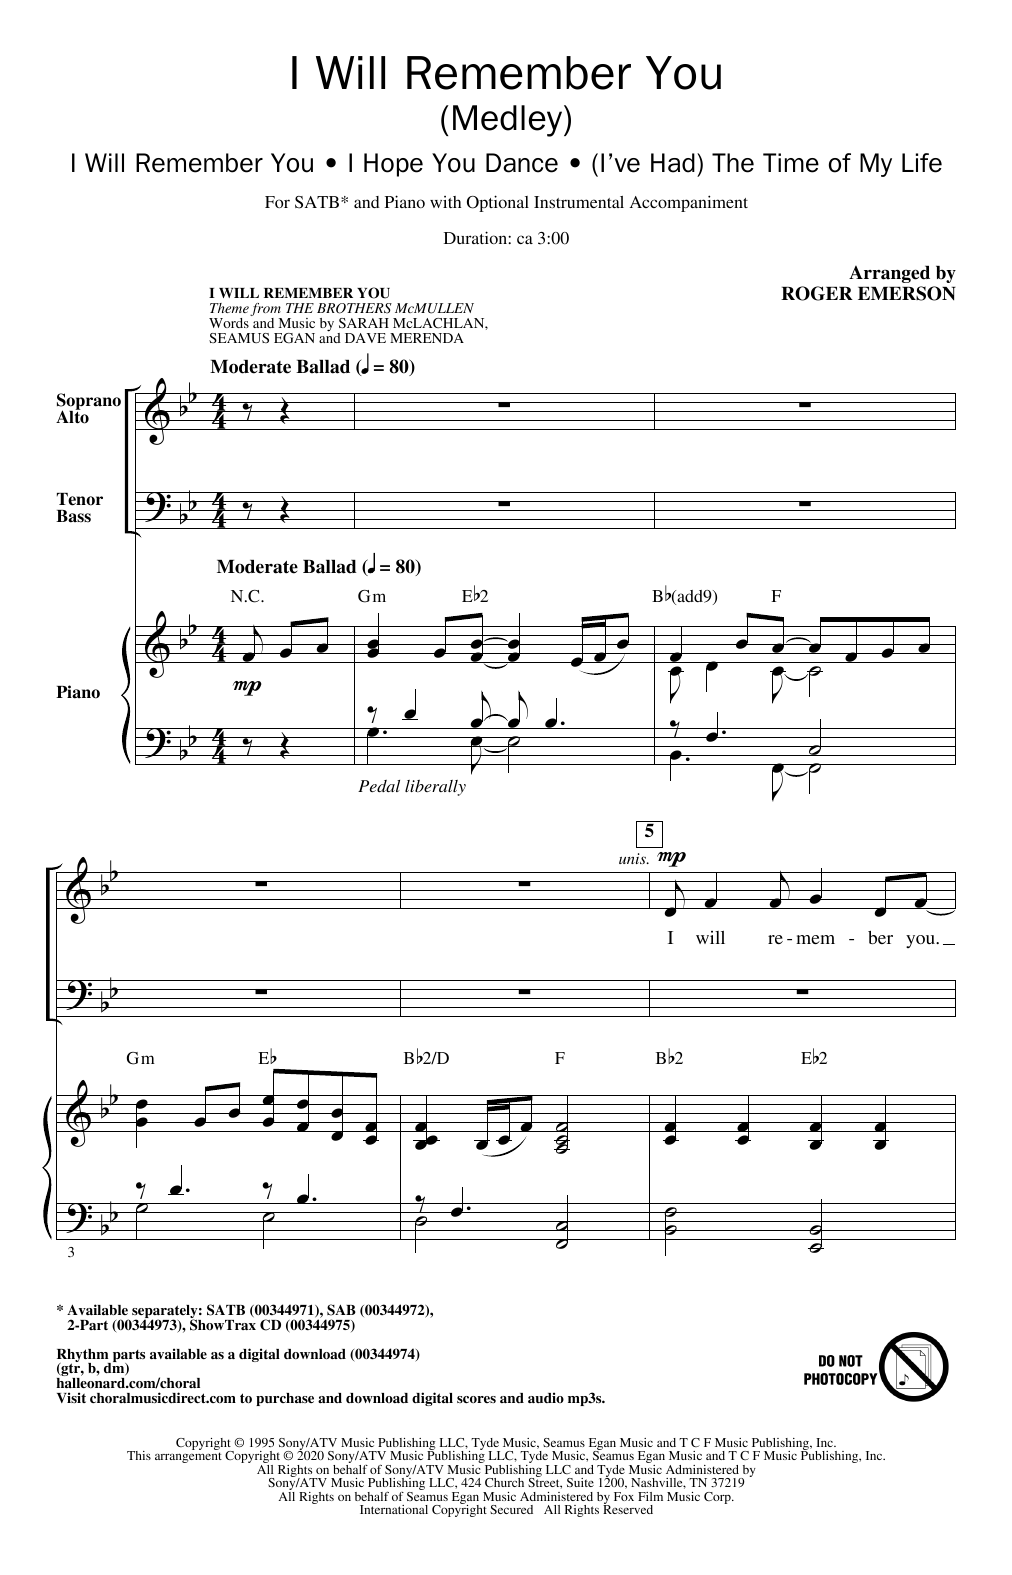 Download Roger Emerson I Will Remember You (Medley) Sheet Music